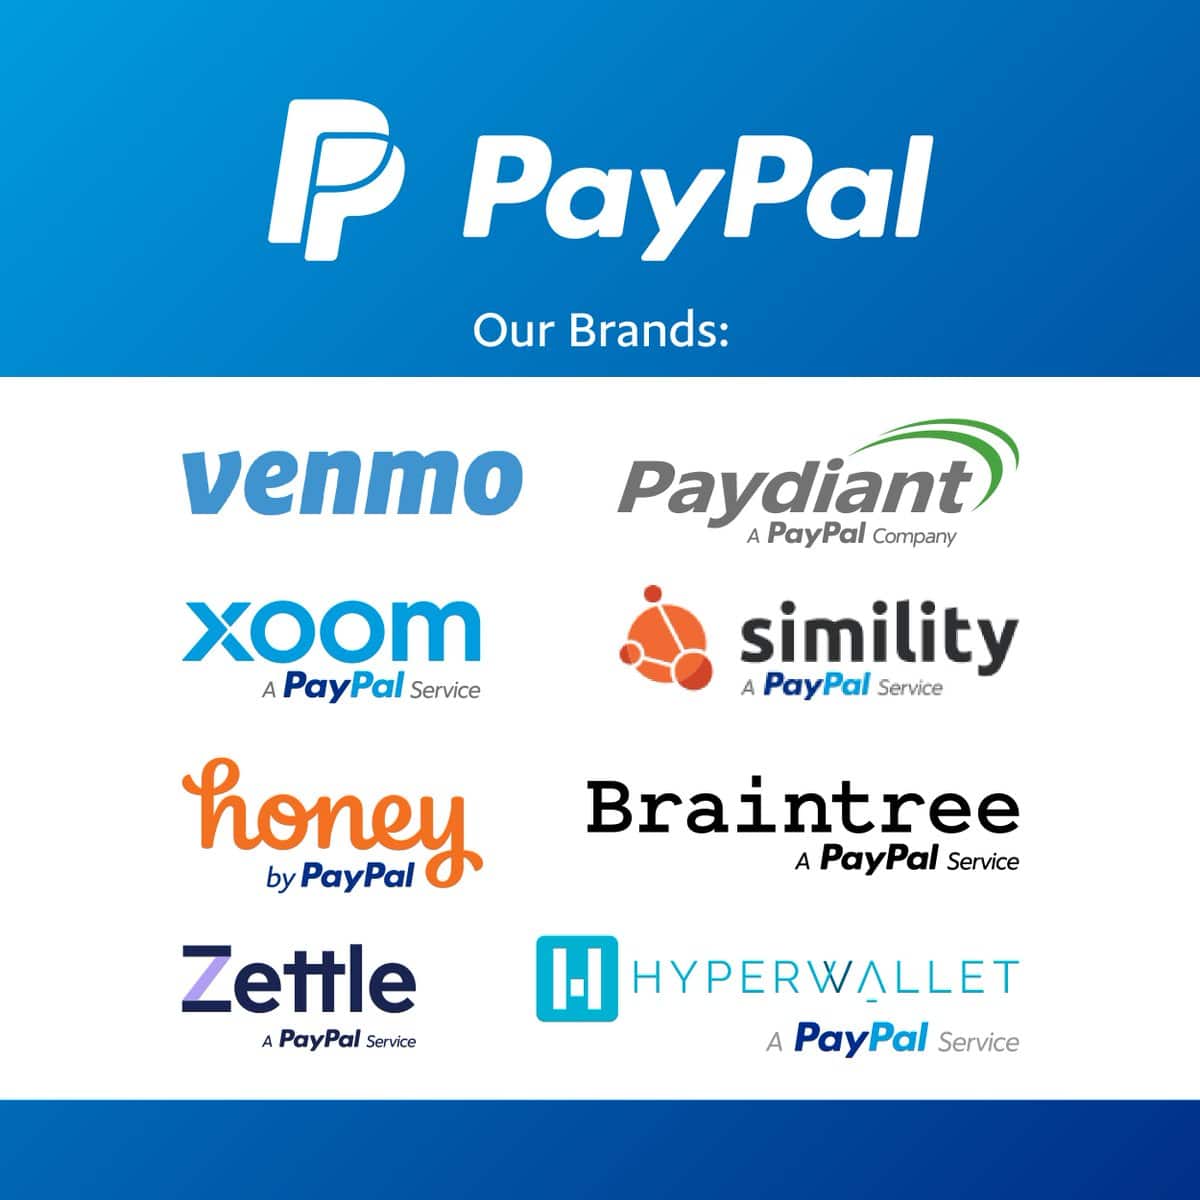 how does PayPal make money